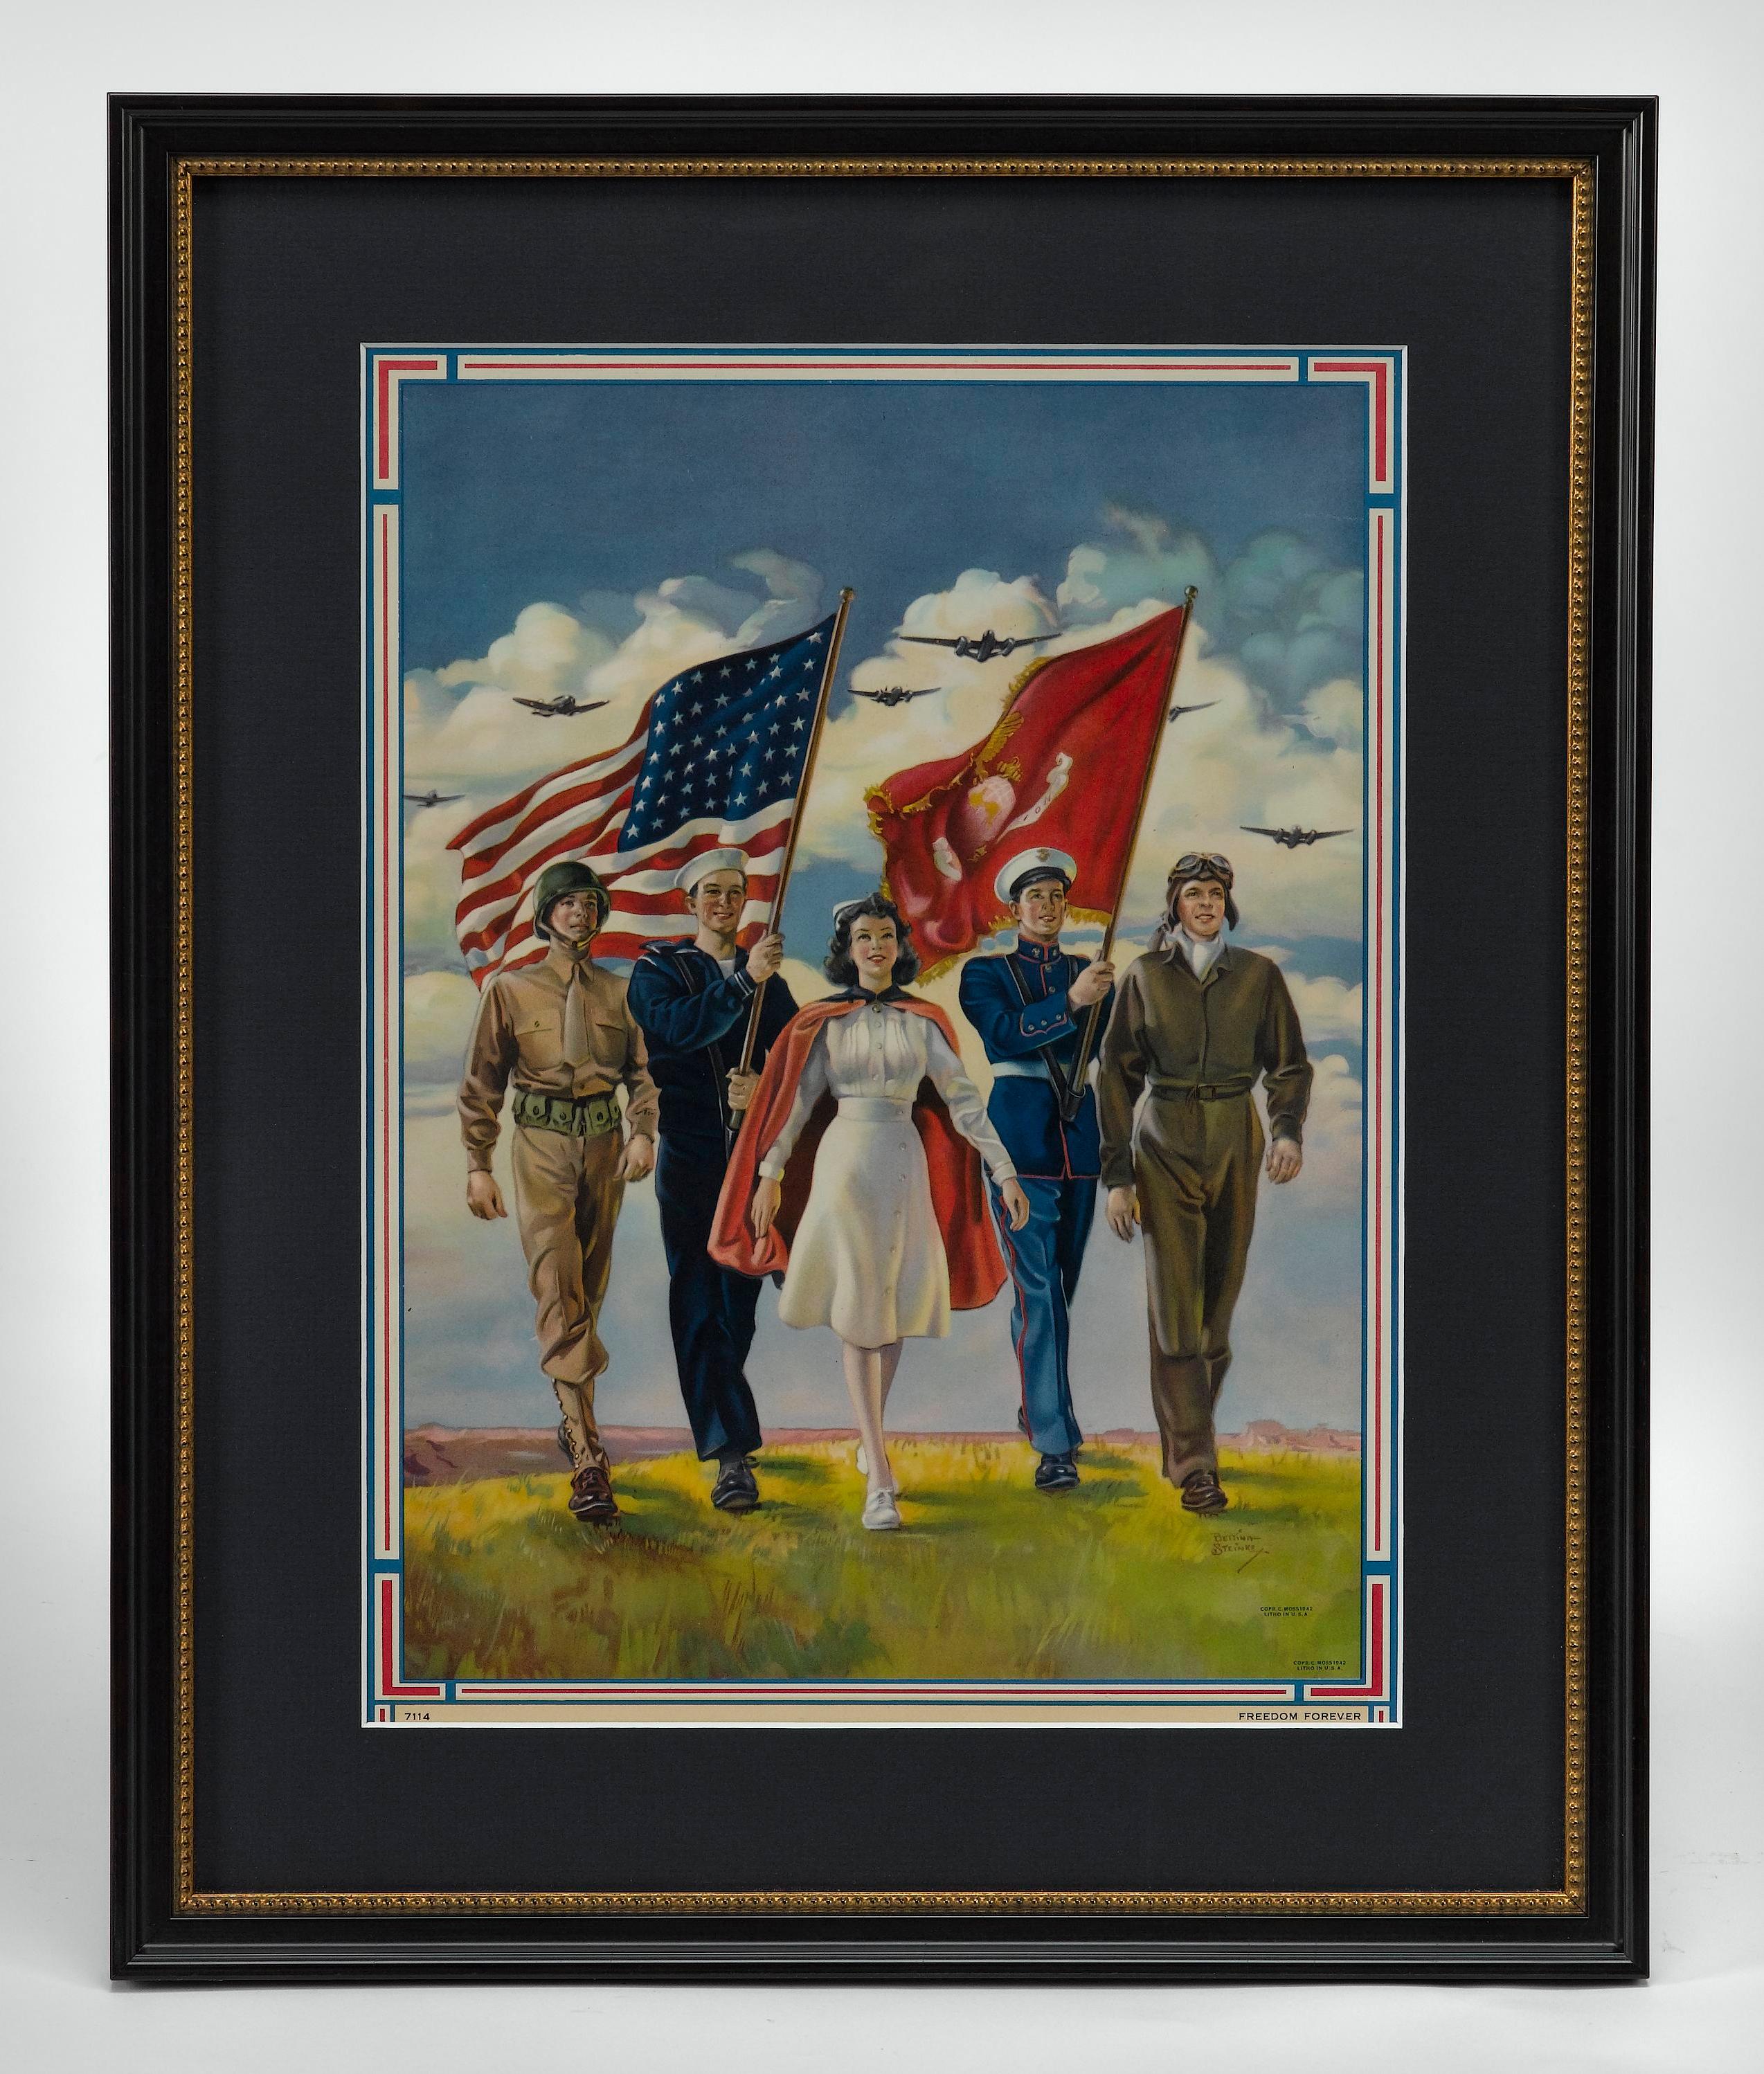 Presented is an original WWII poster by Bettina Steinke. The poster depicts, from left to right, an American Army soldier, a Navy man, a nurse, a Marine, and a pilot. The Navy man carries a waving American flag on a flag pole. The Marine carries a